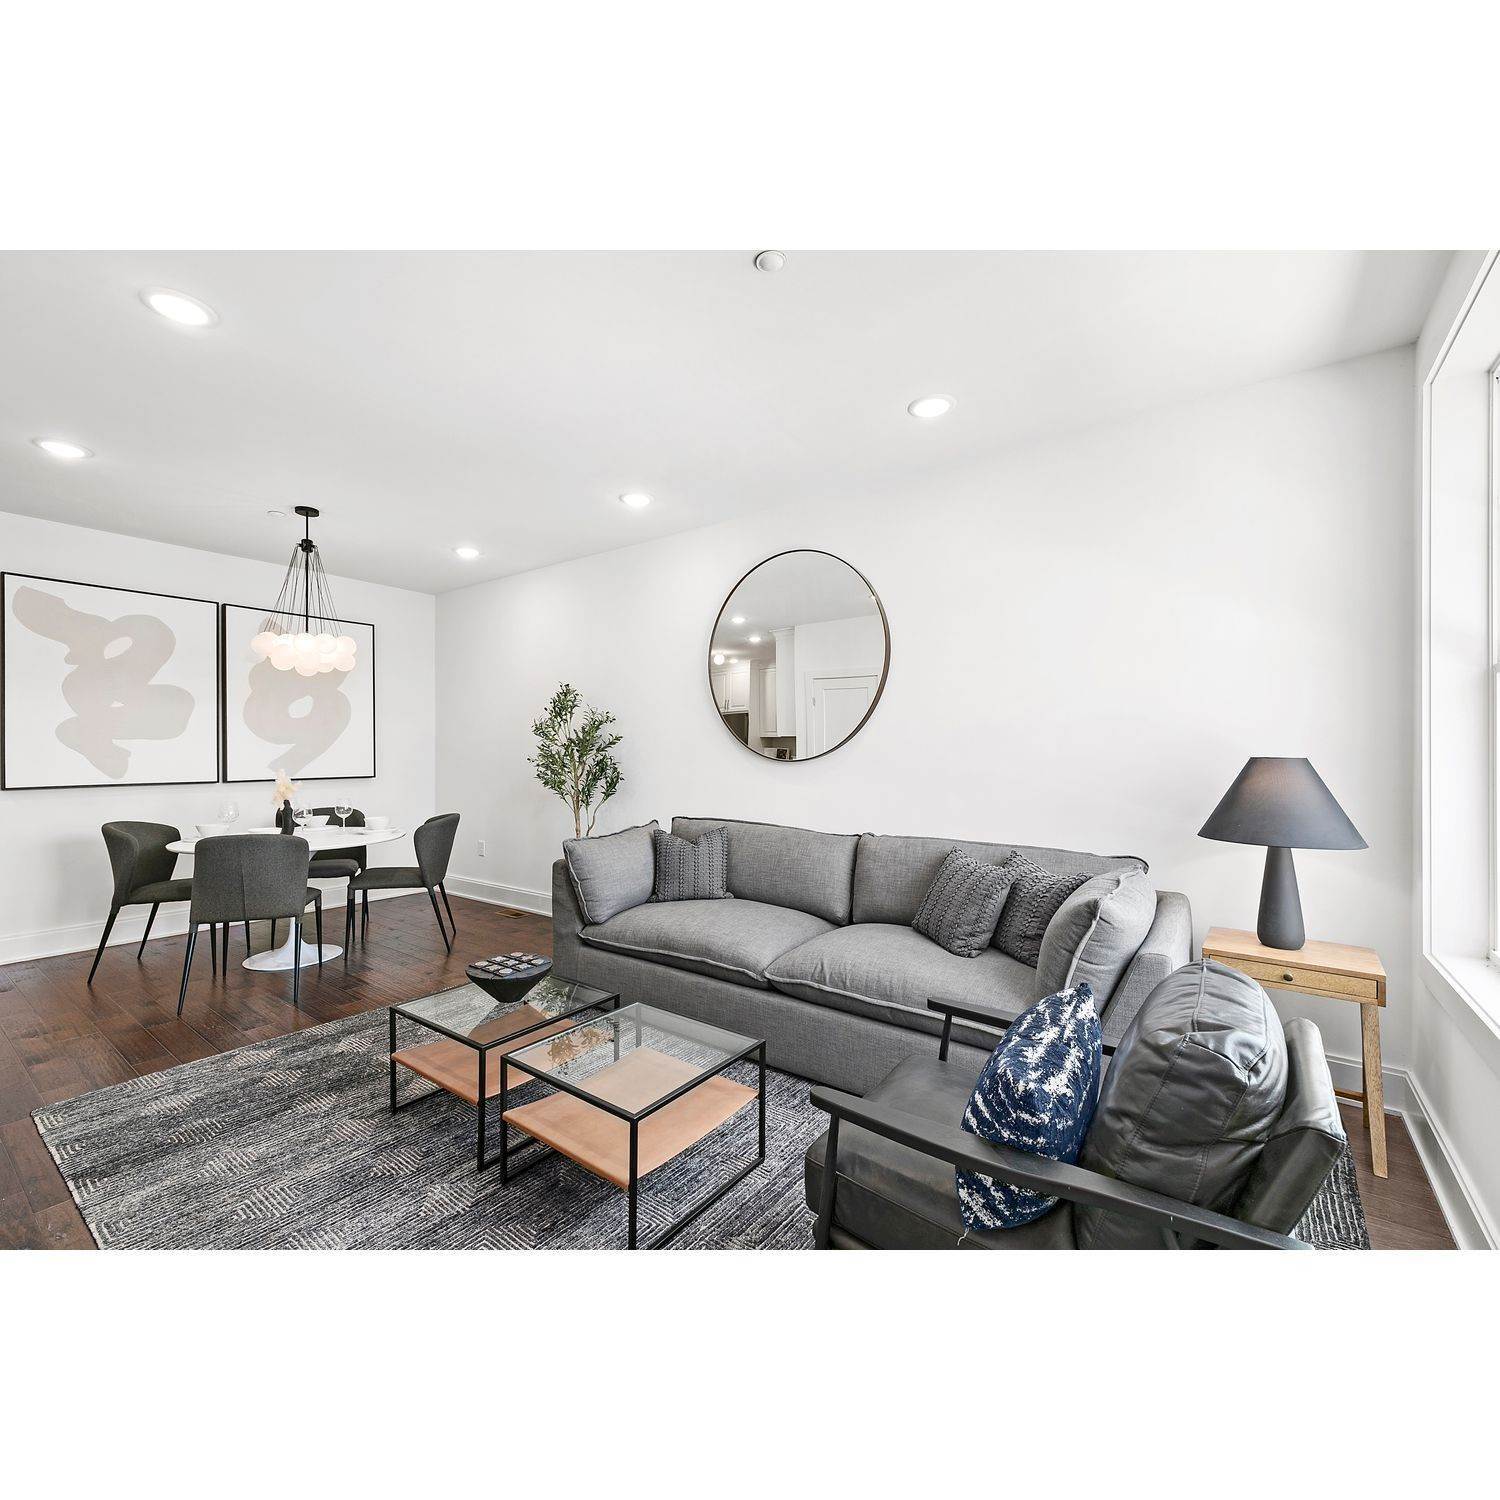 38. Meadowbrook Pointe East Meadow xây dựng tại 123 Merrick Avenue, East Meadow, NY 11554